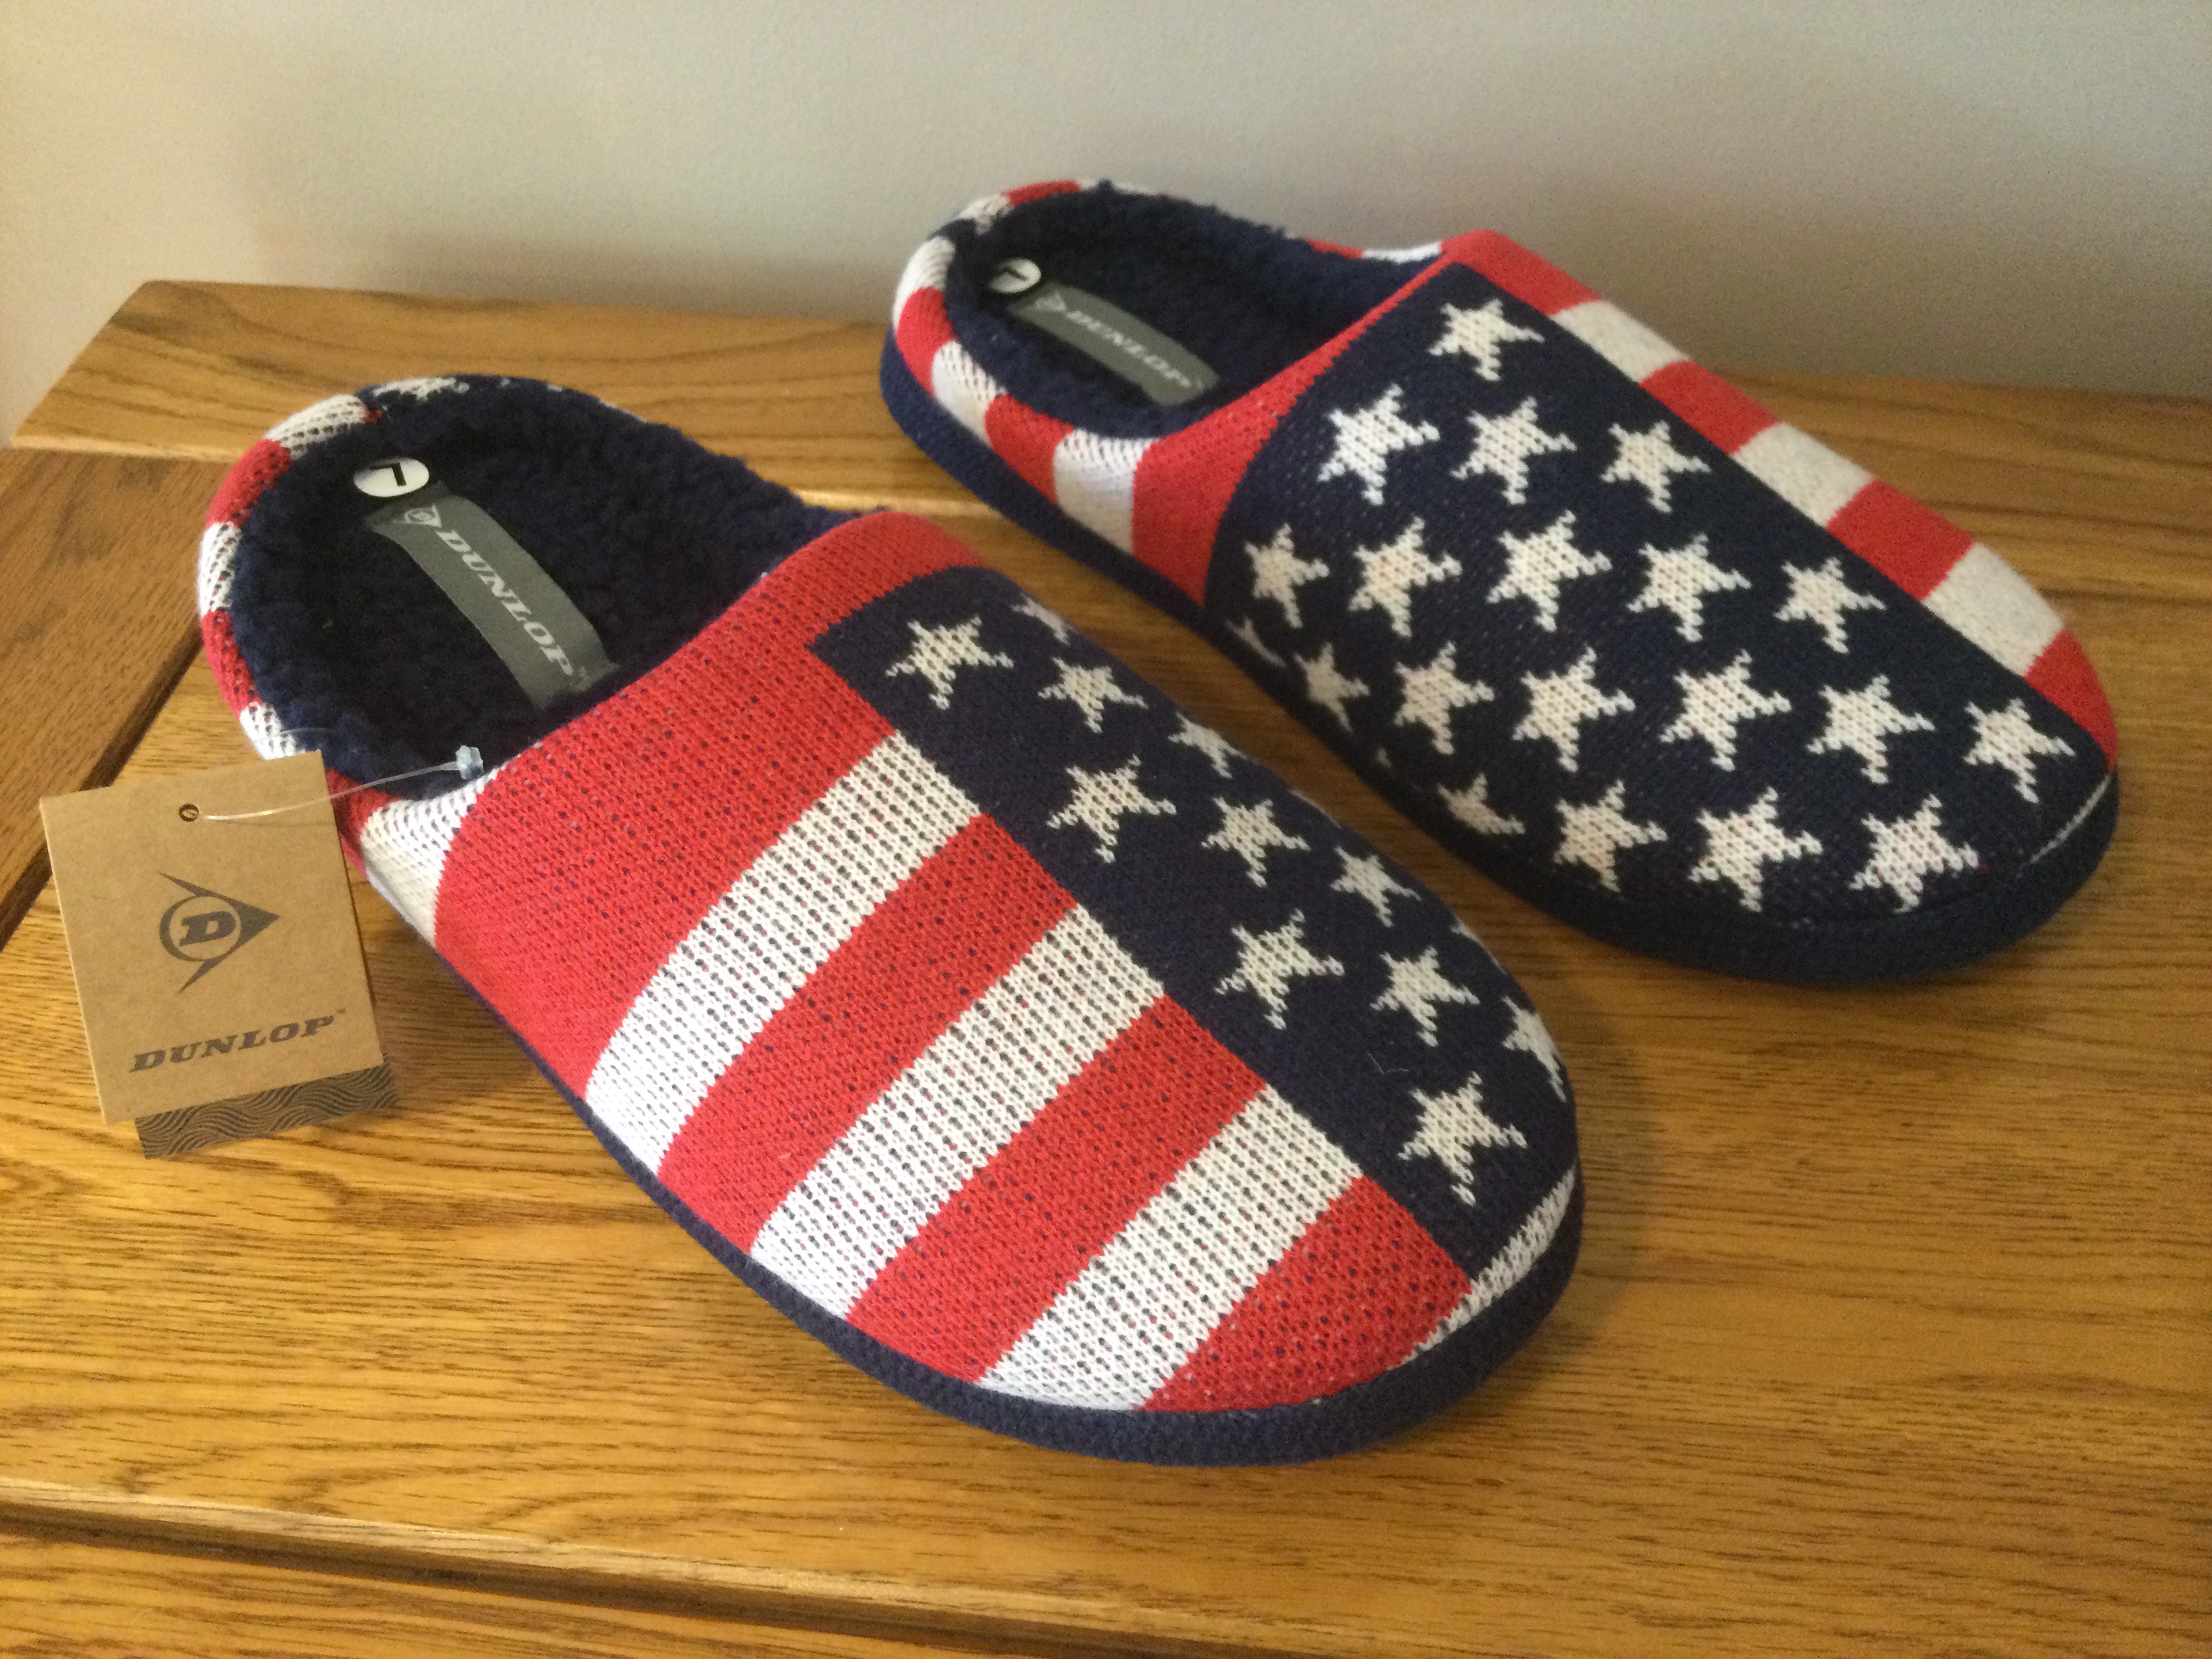 Men's Dunlop, “USA Stars and Stripes” Memory Foam, Mule Slippers, Size L (10/11) - New - Image 4 of 5